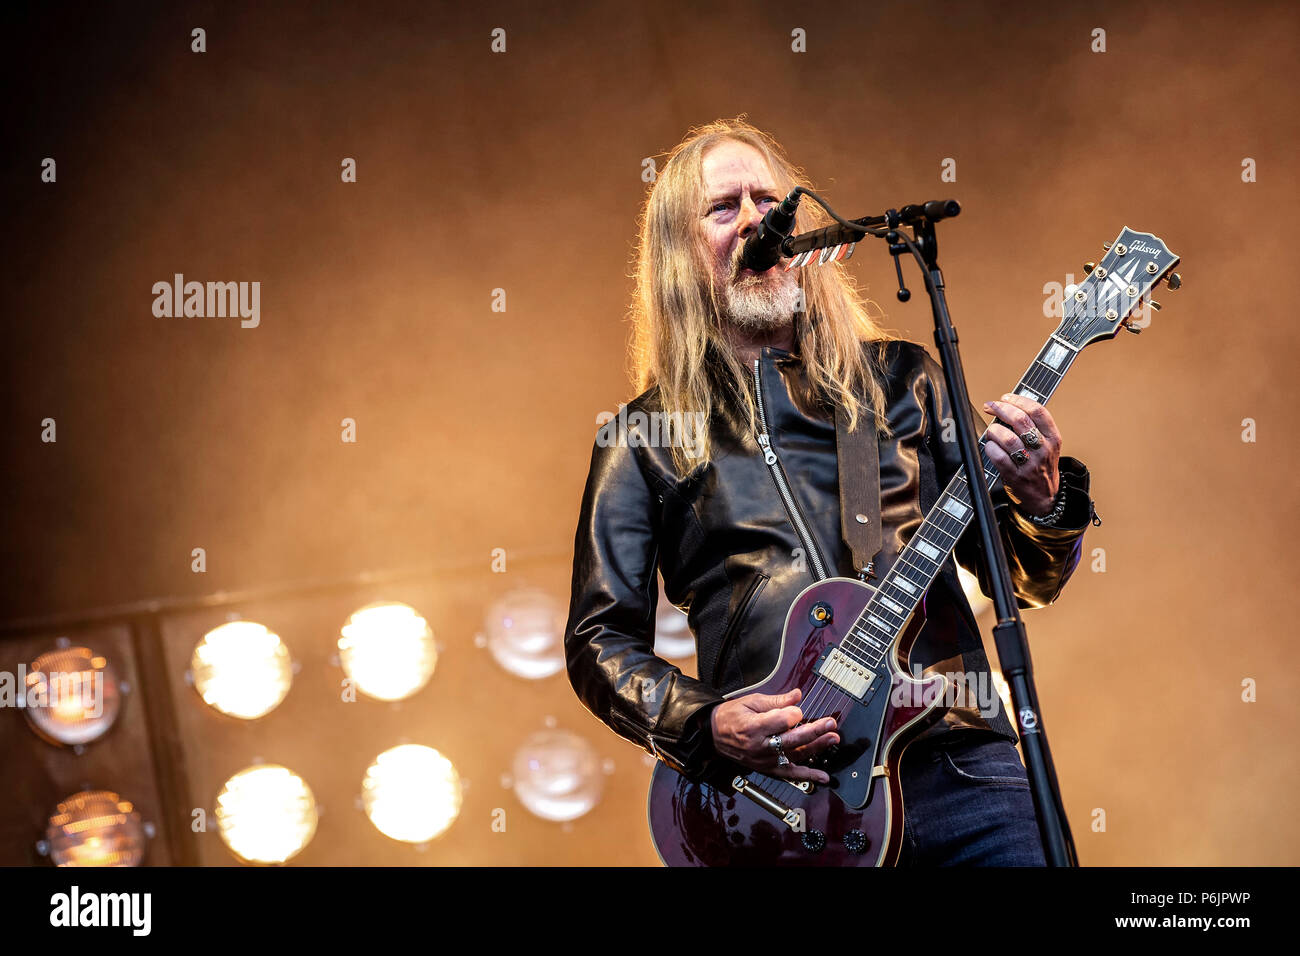 Norway, Halden - June 21, 2018. The American rock band Alice in Chains performs a live concert during the Norwegian music metal festival Tons of Rock 2018 in Halden. Here singer and guitarist Jerry Cantrell is seen live on stage. (Photo credit: Gonzales Photo - Terje Dokken). Stock Photo